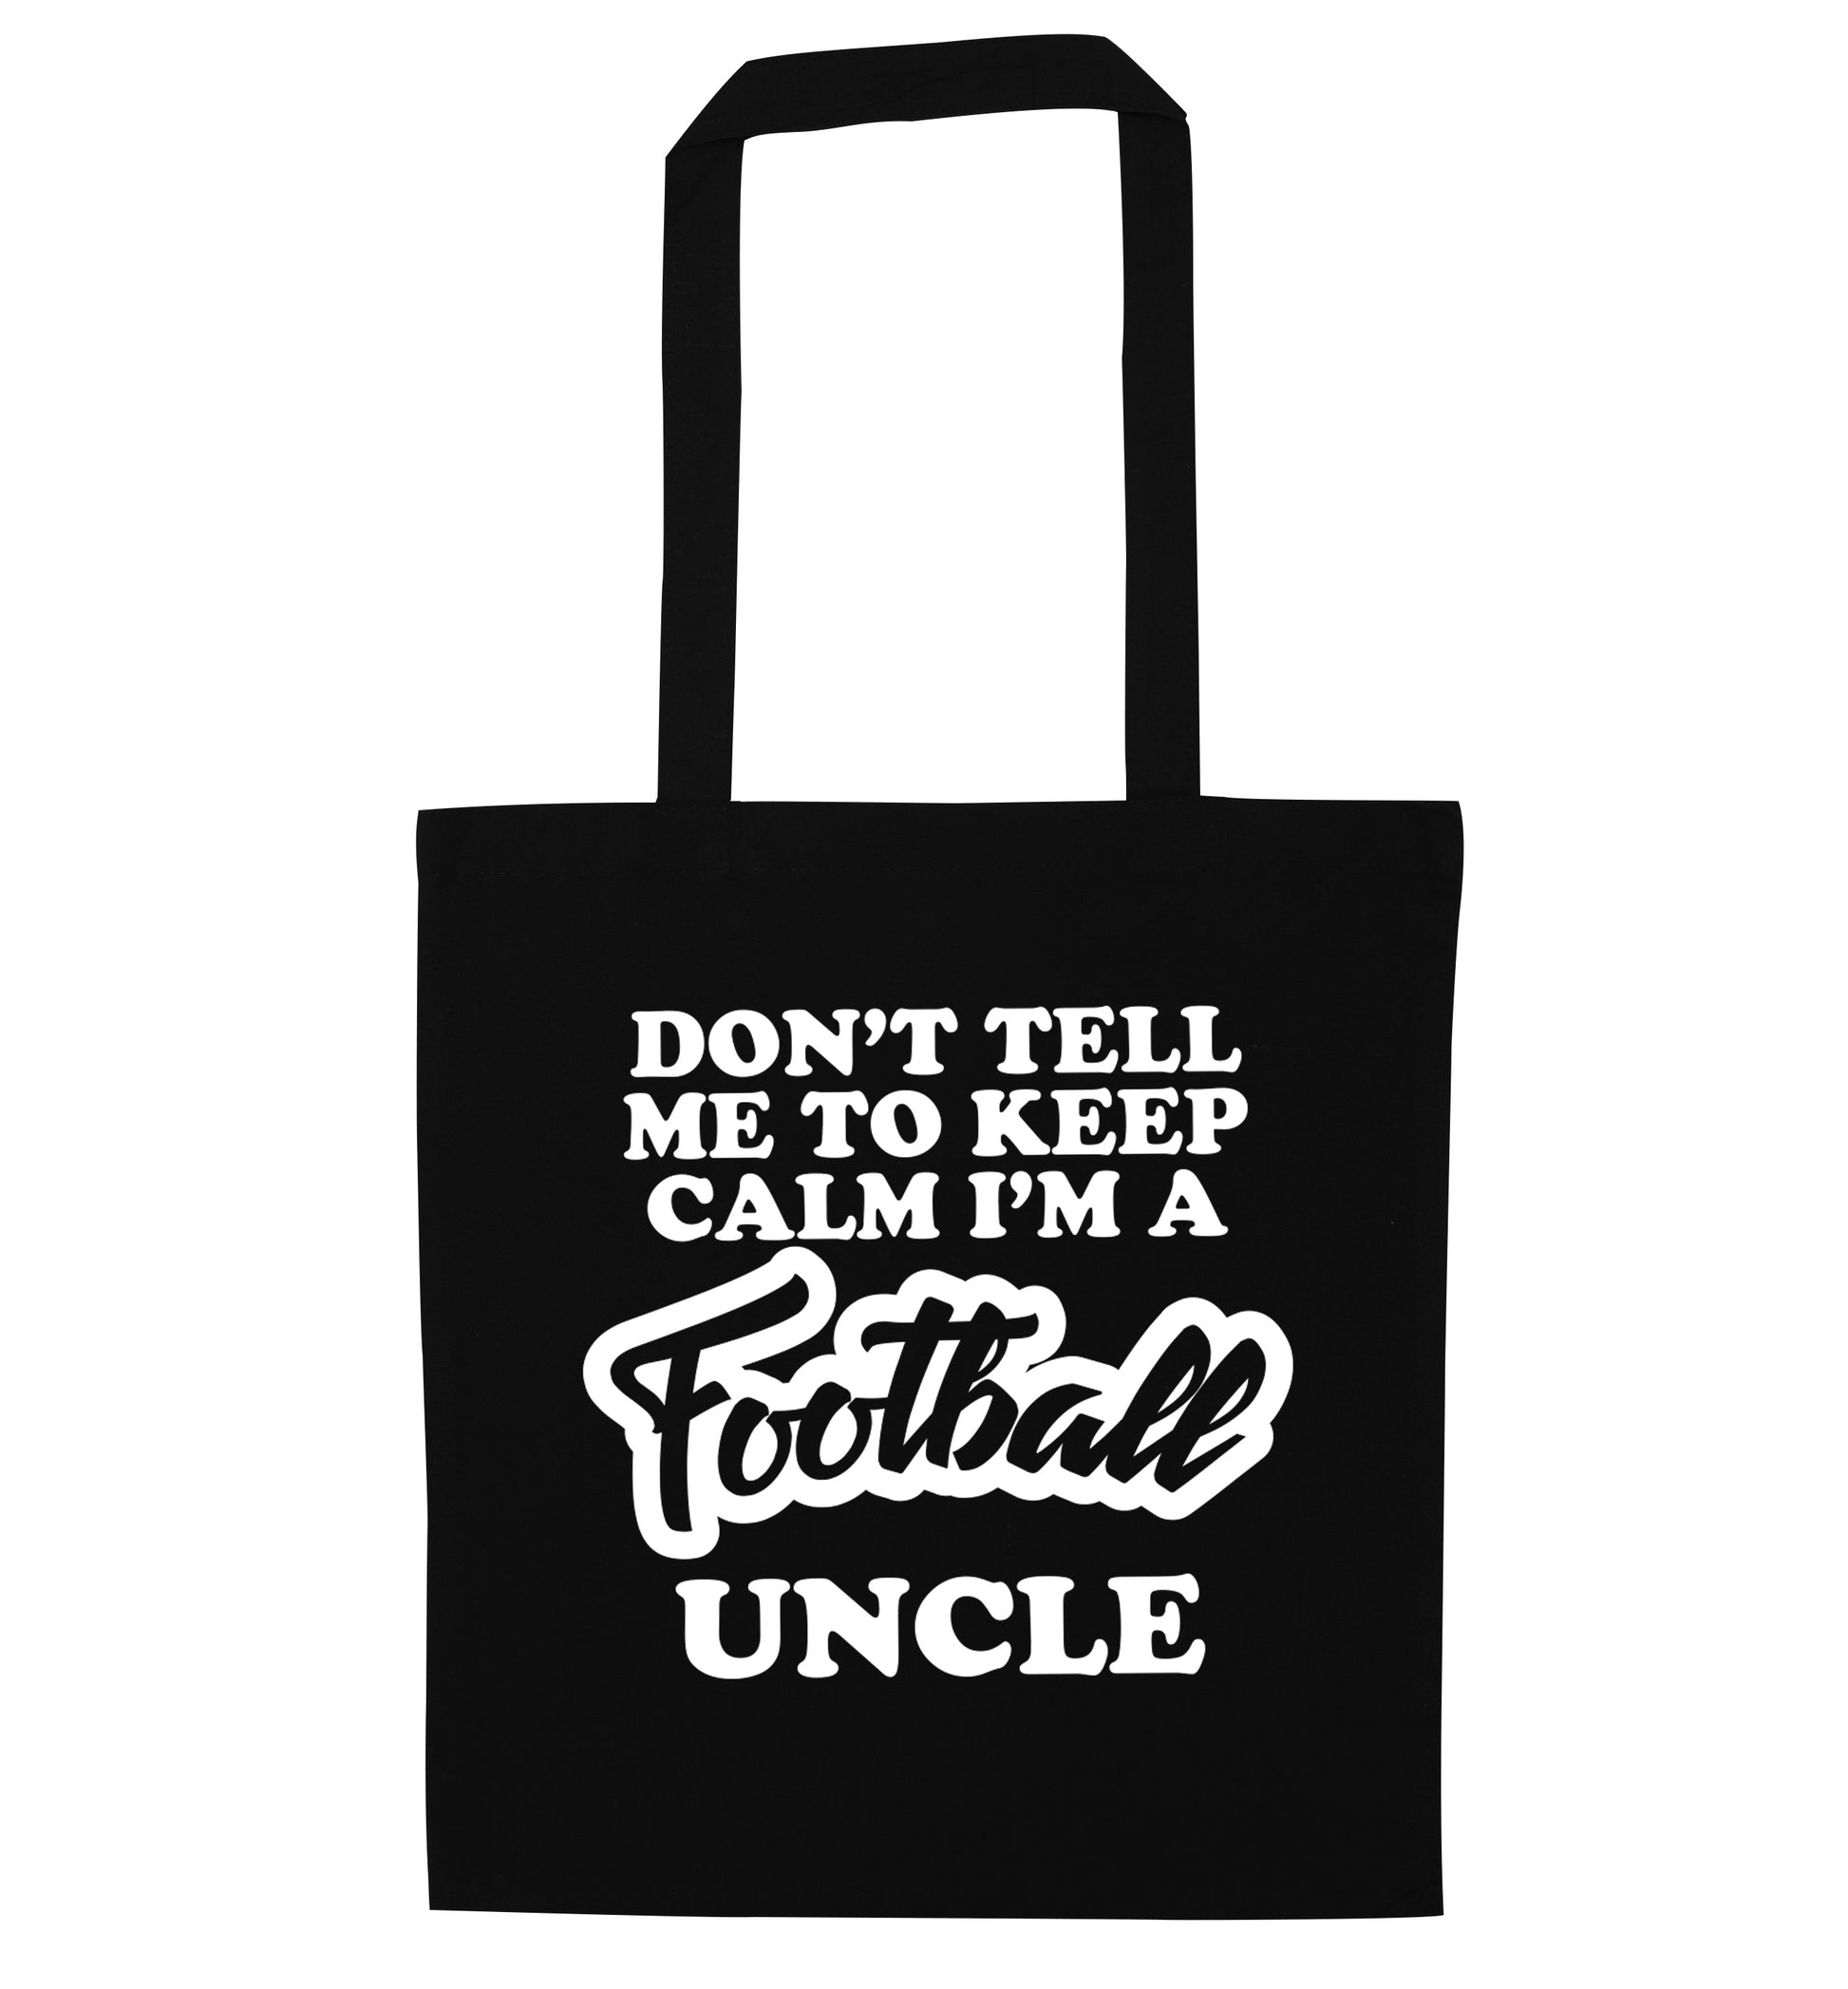 Don't tell me to keep calm I'm a football uncle black tote bag